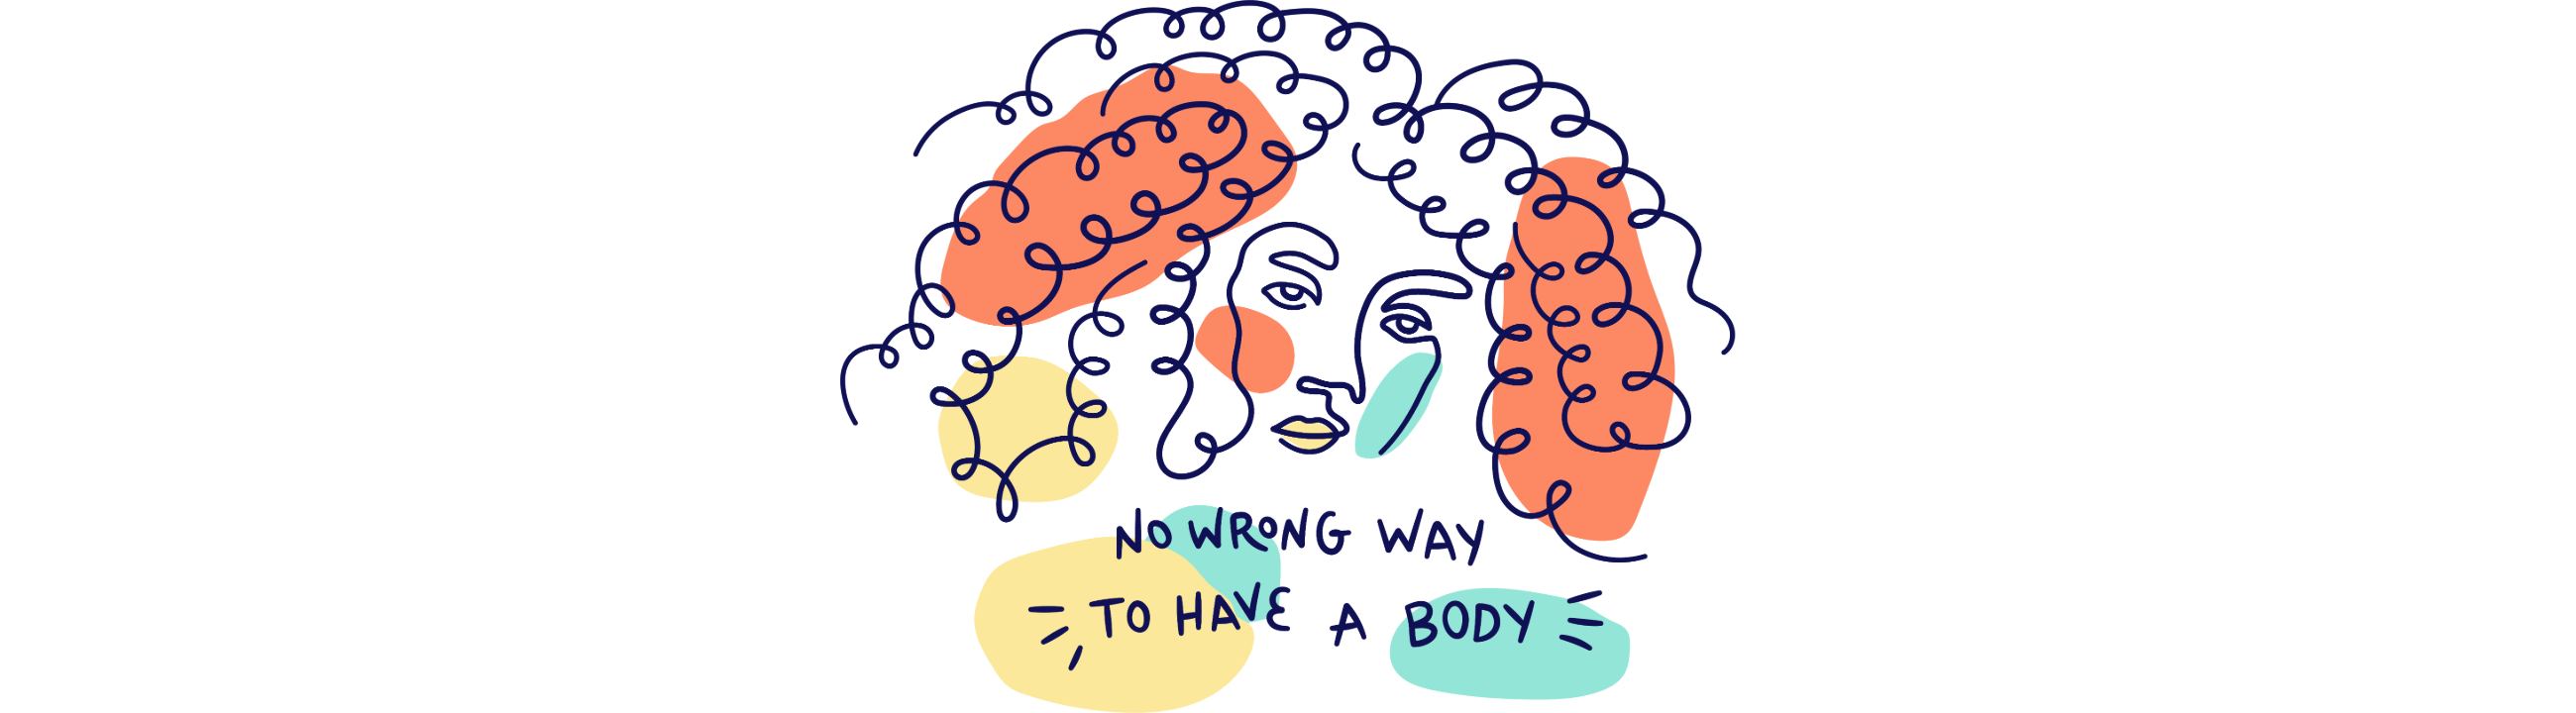 No Wrong Way to have a Body